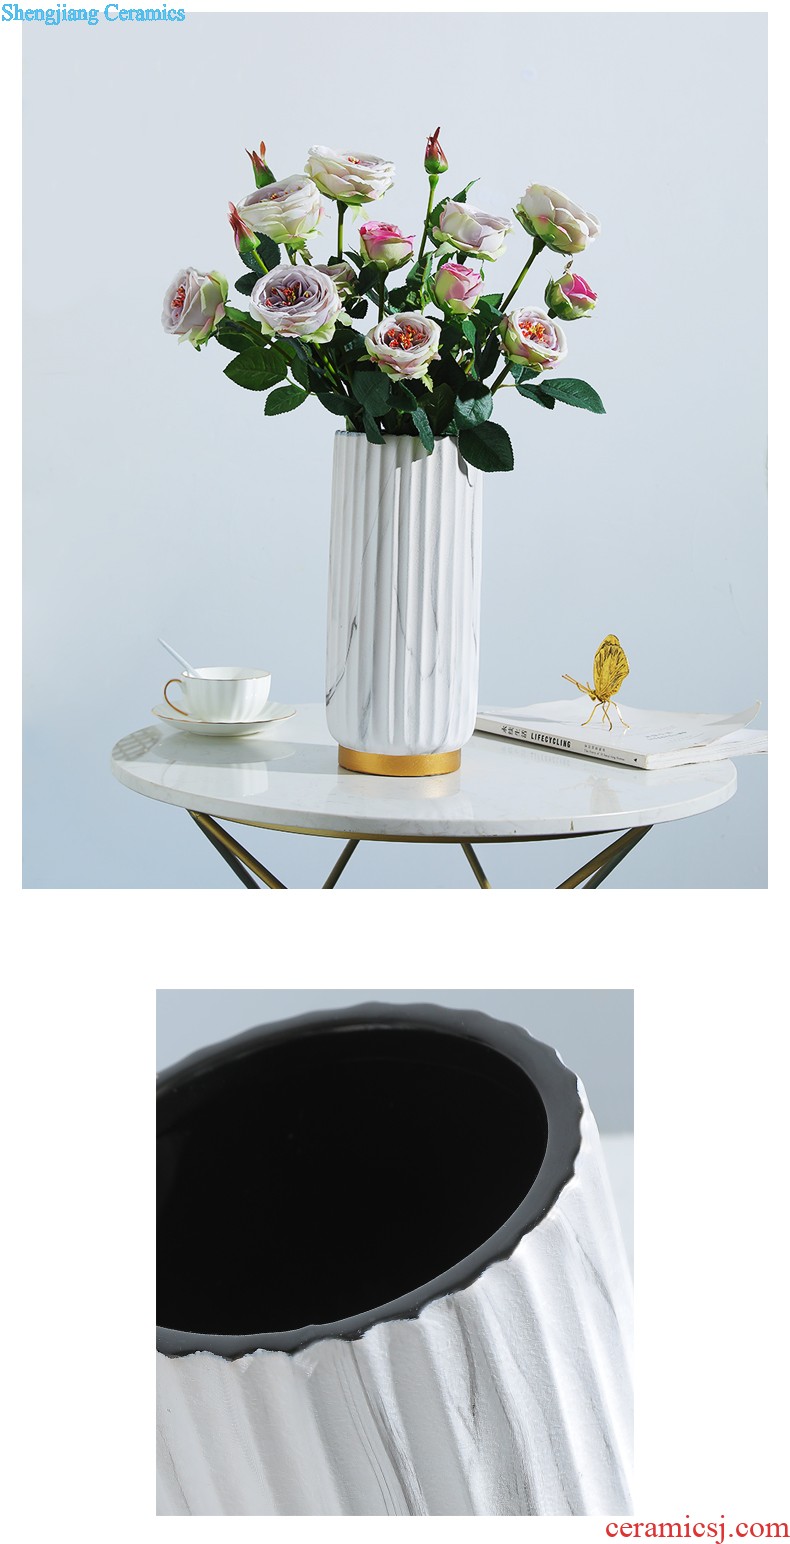 Northern Europe is contemporary and contracted marble grain phnom penh is vertical grain straight cylinder vase places a sitting room to arrange adornment of flower of adornment places a marble grain phnom penh is vertical grain straight cylinder vase北欧现代简约大理石纹金边竖纹直筒花瓶摆件客厅插花装饰品摆件 大理石纹金边竖纹直筒花瓶